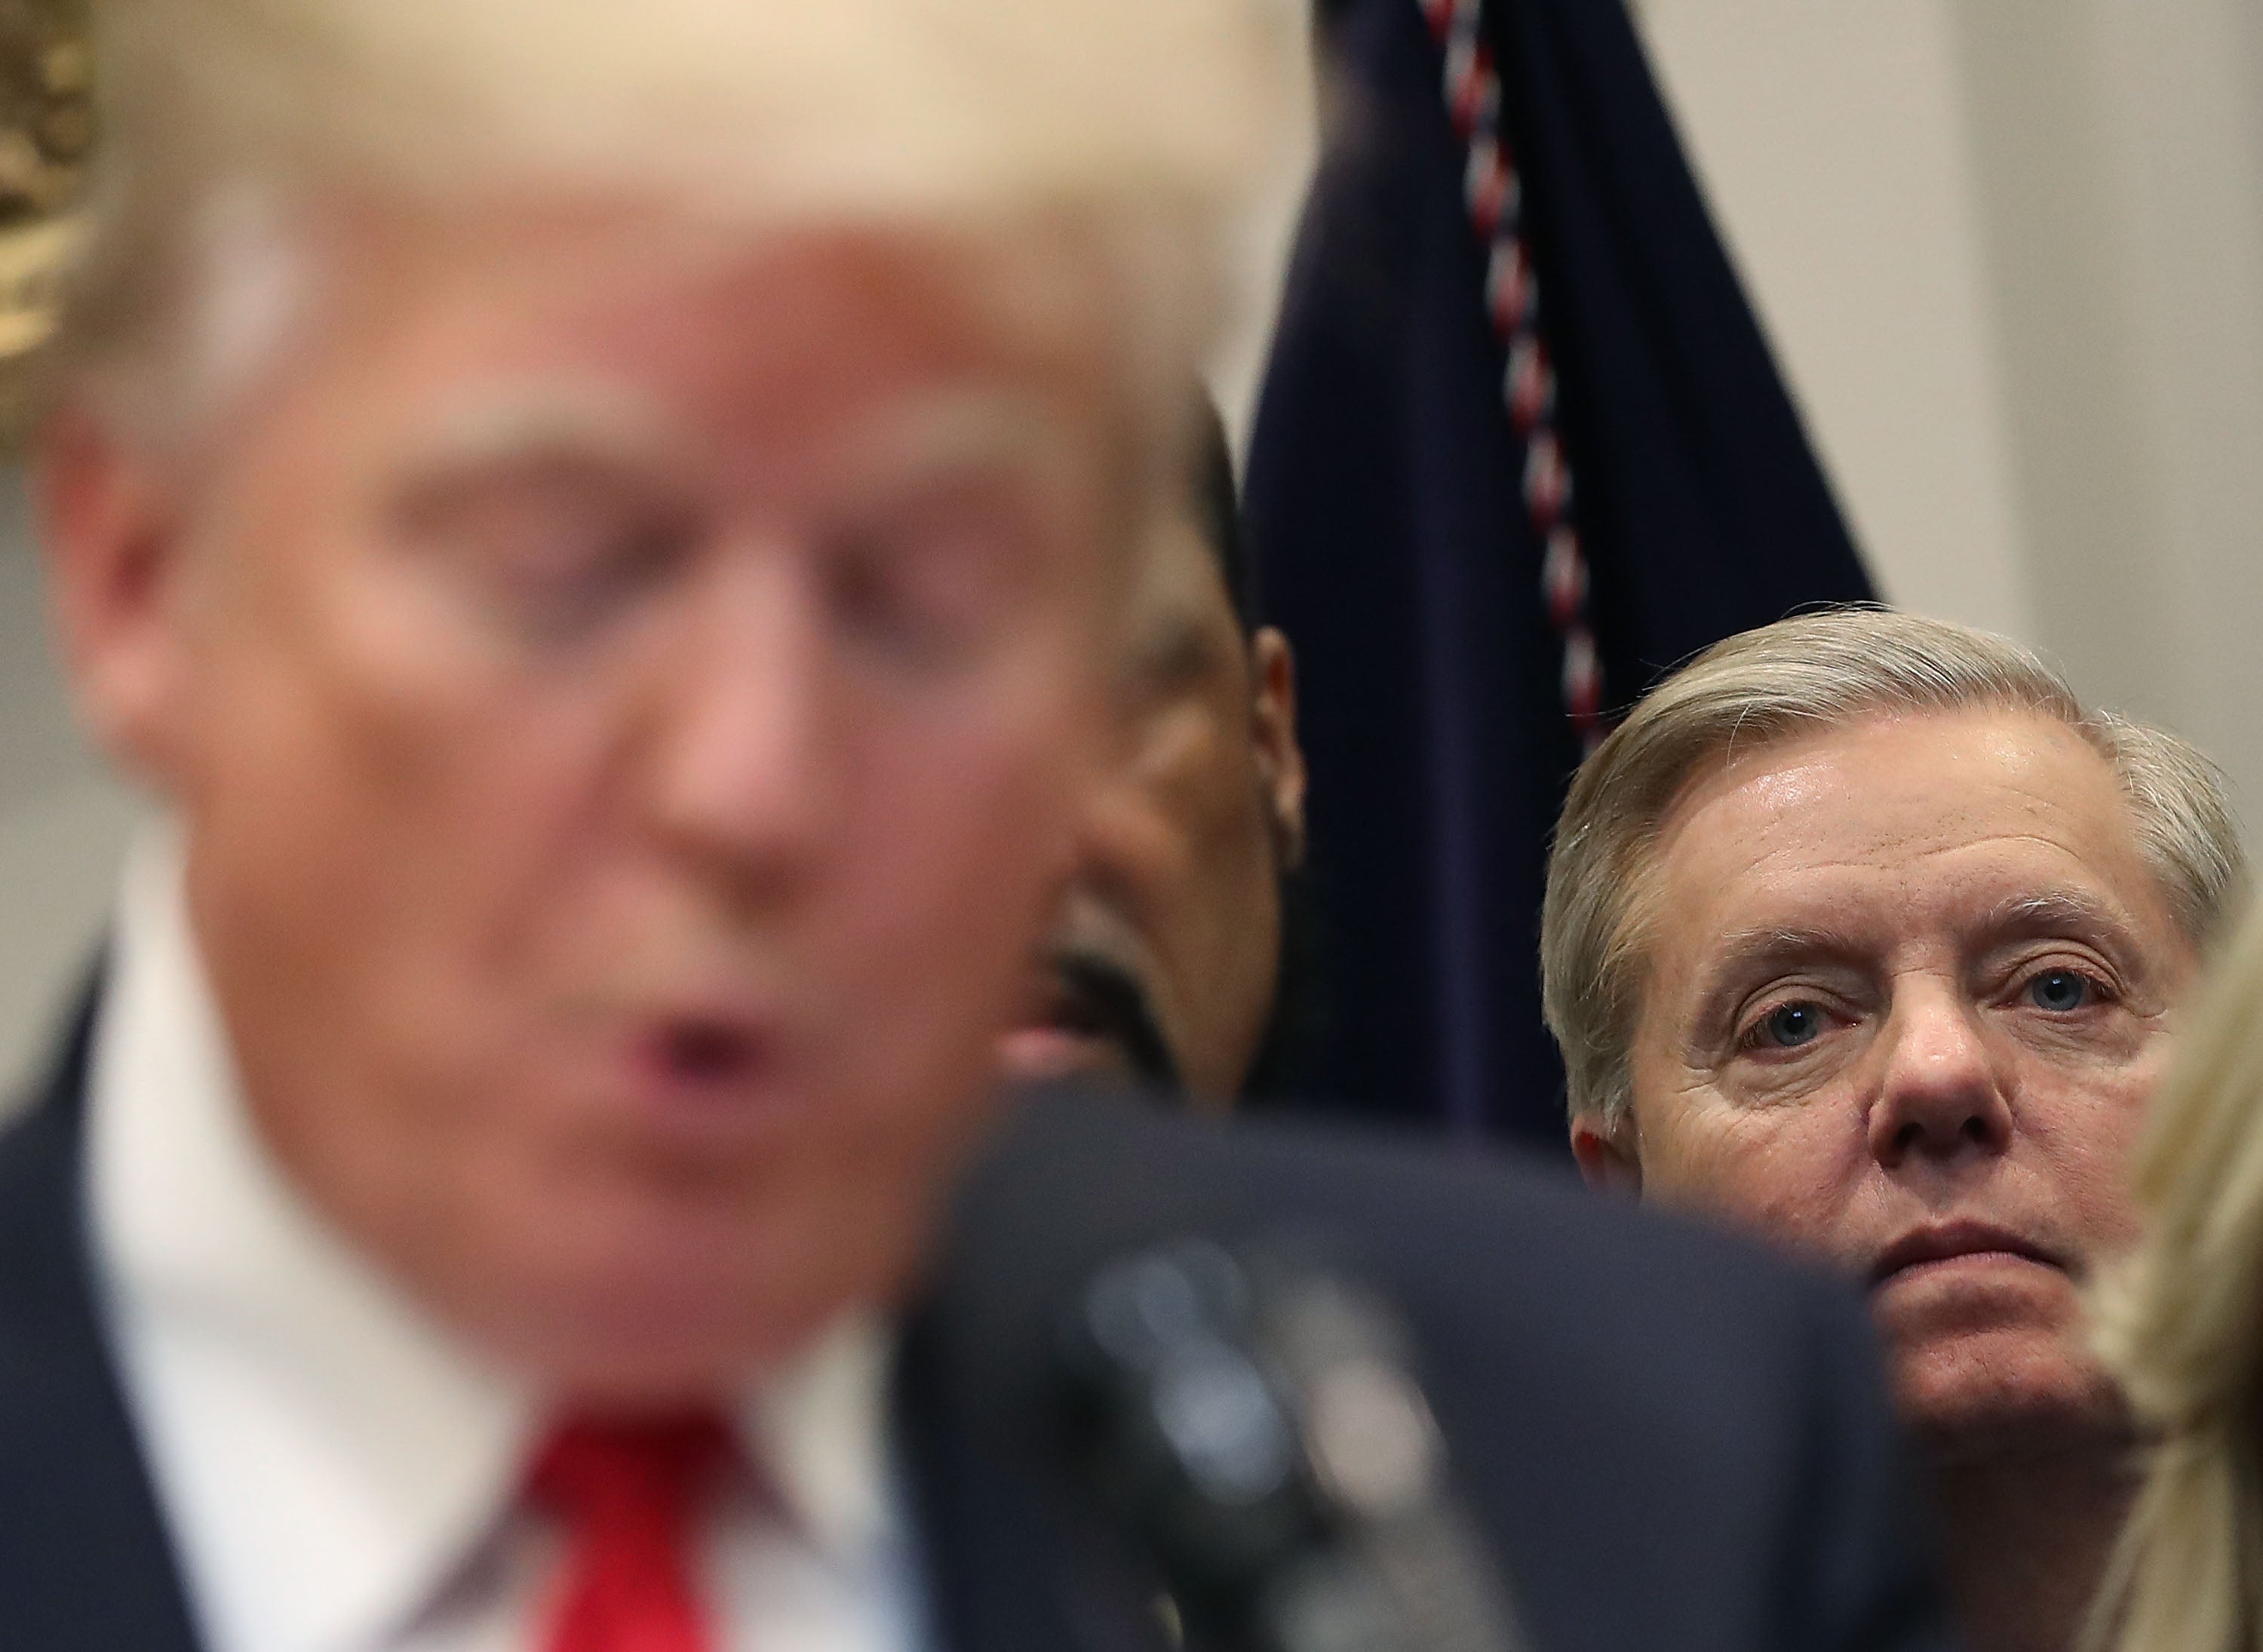 Lindsay Graham has mostly been a key ally of Donald Trump although criticised him after January 6